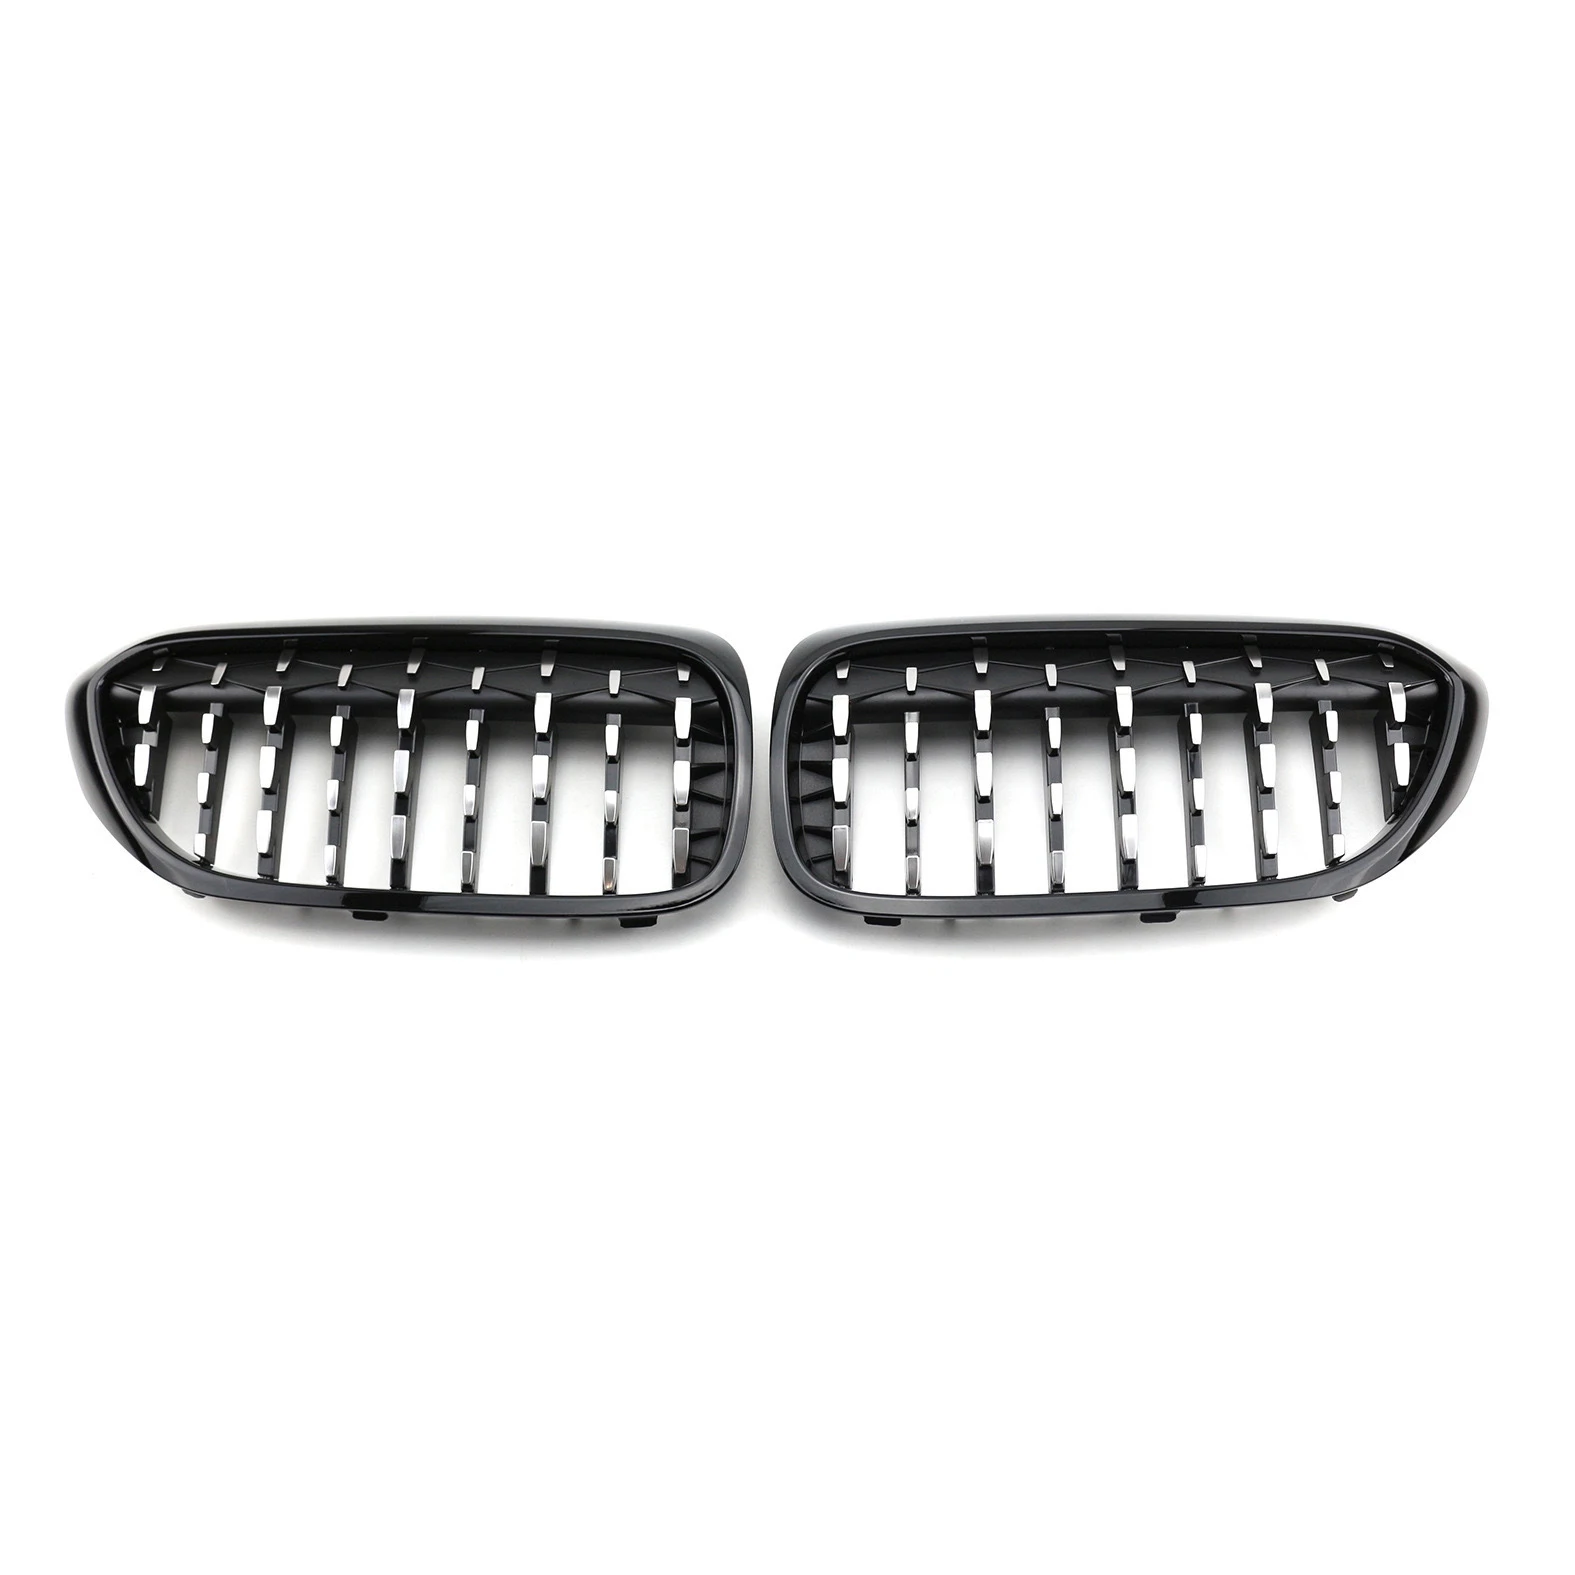 

Car Front Grille Bumper Kidney Grill for -BMW 5 Series G30 G31 G38 2018 2019 2020 Diamond Racing Grills Meteor Style